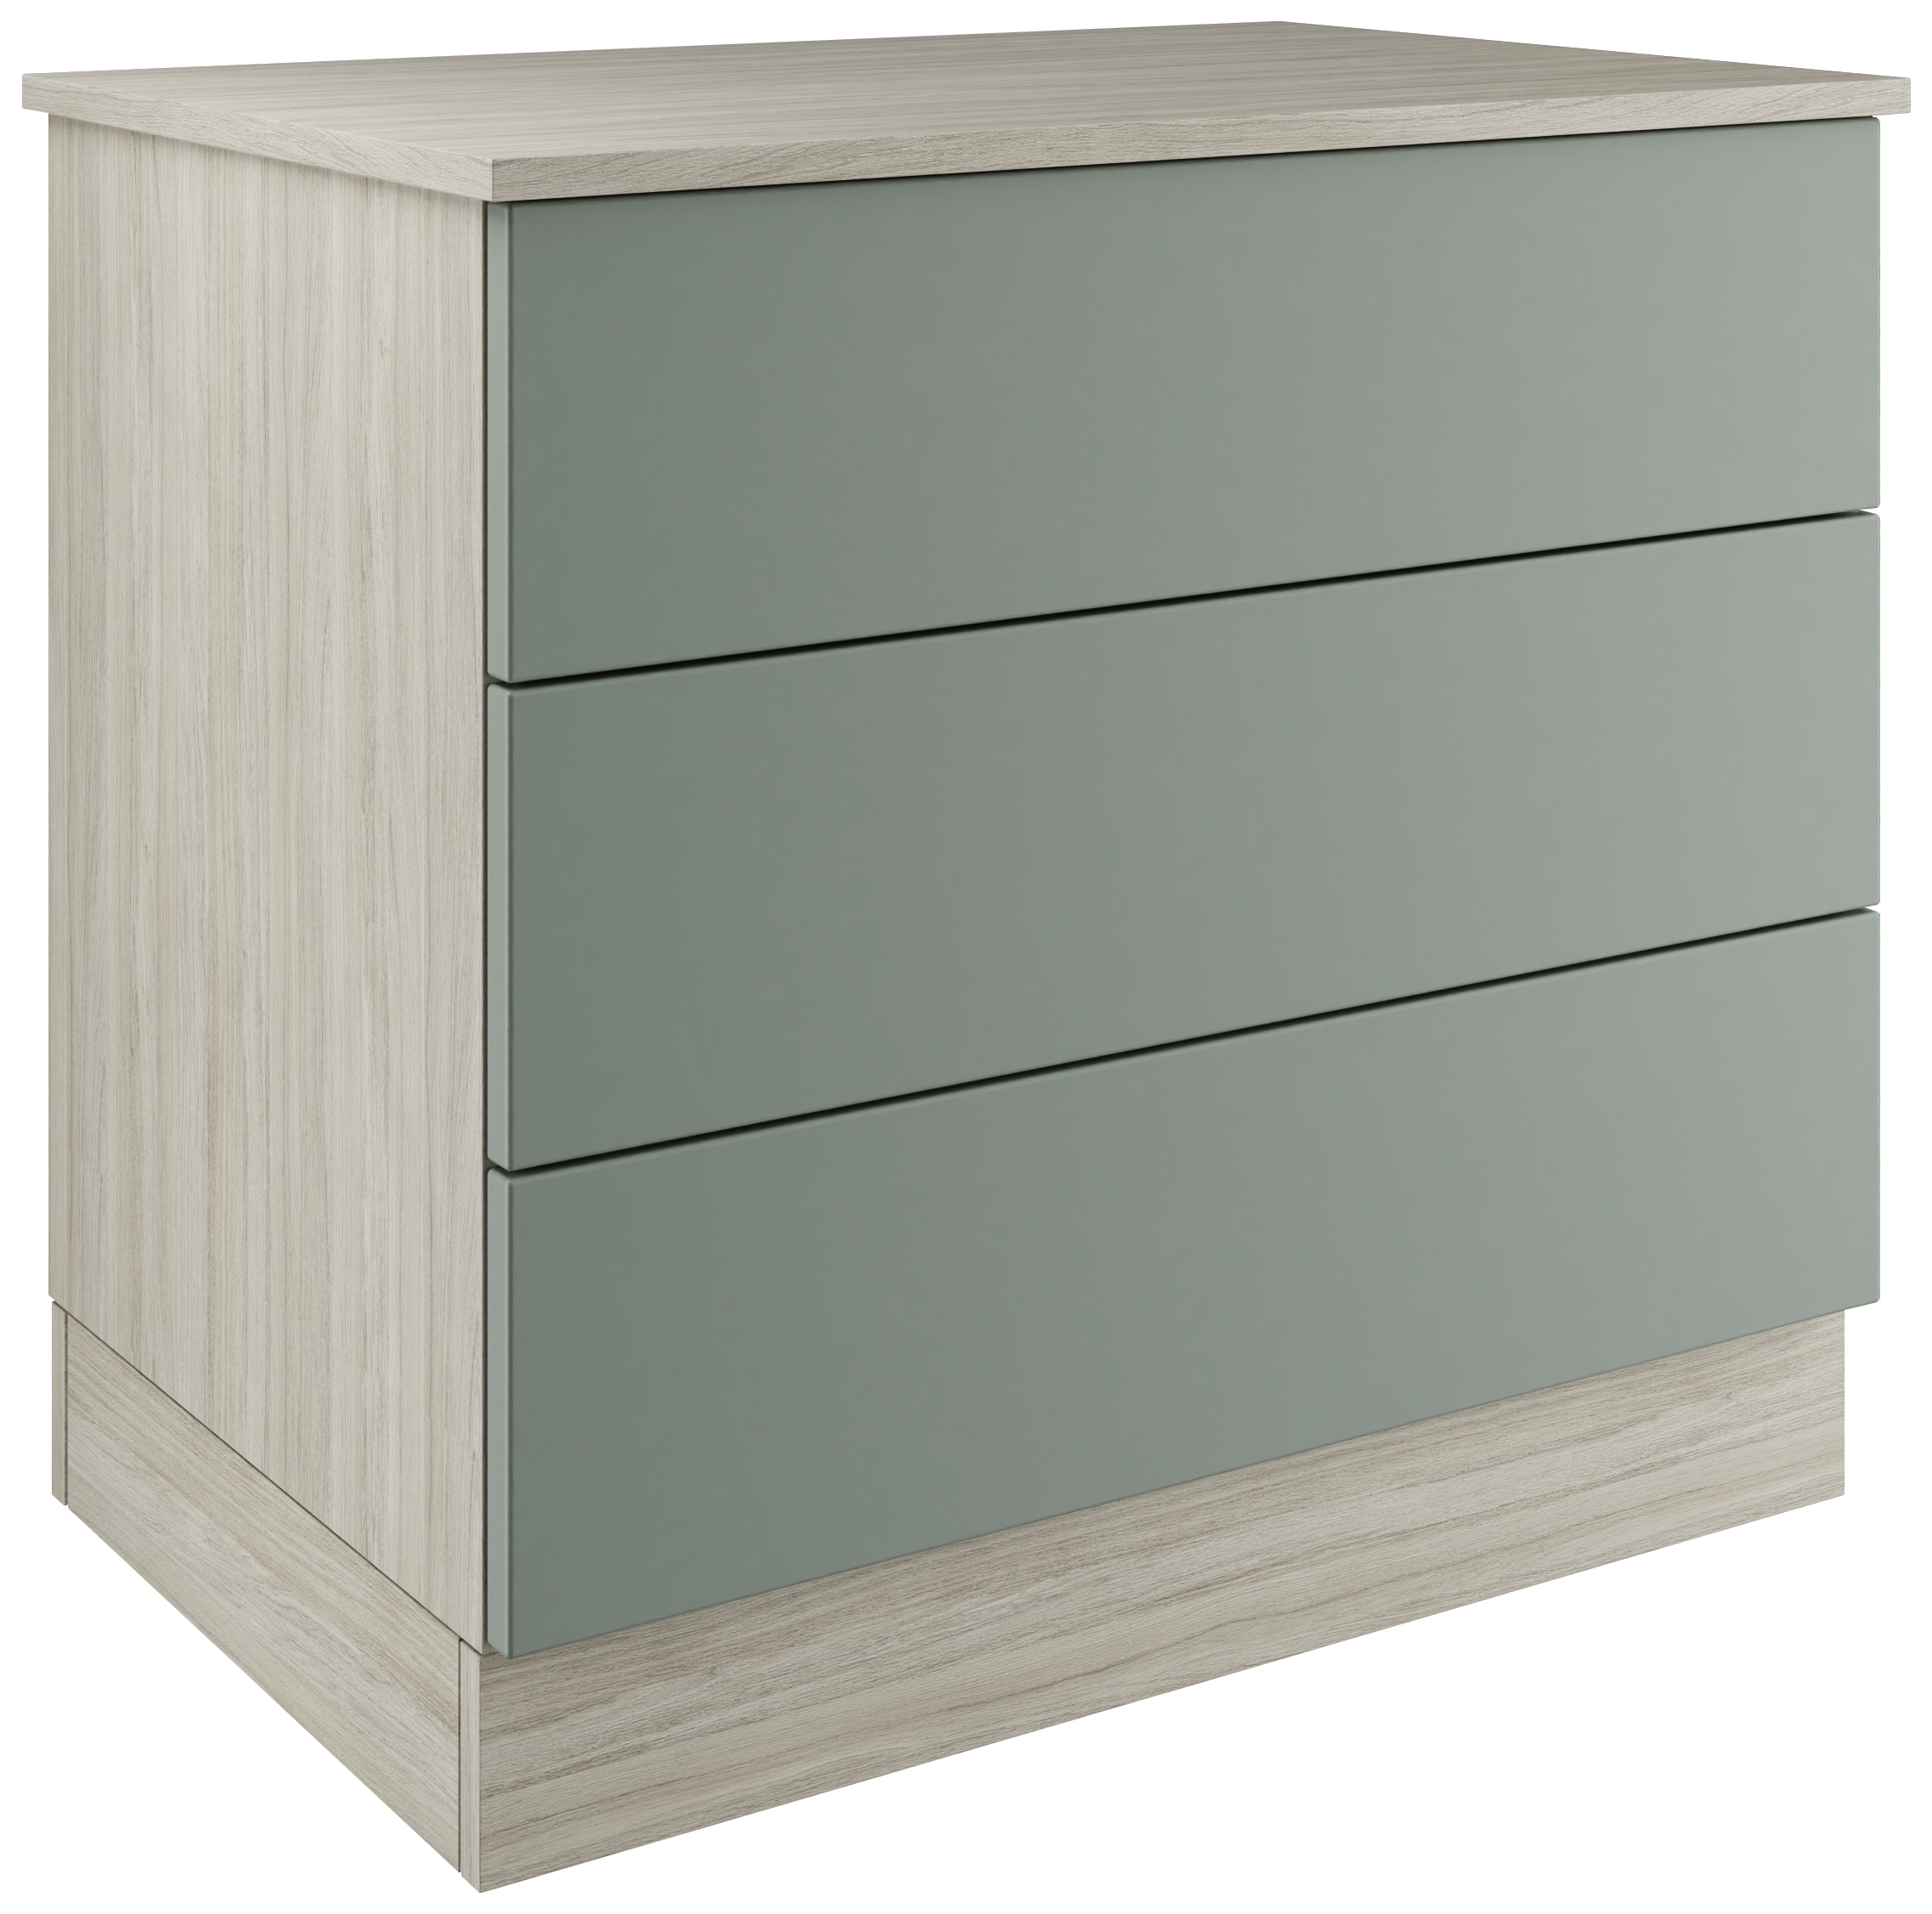 Harrogate & Bramham Sage Green Double Chest with 3 Drawers - 820 x 730 x 520mm